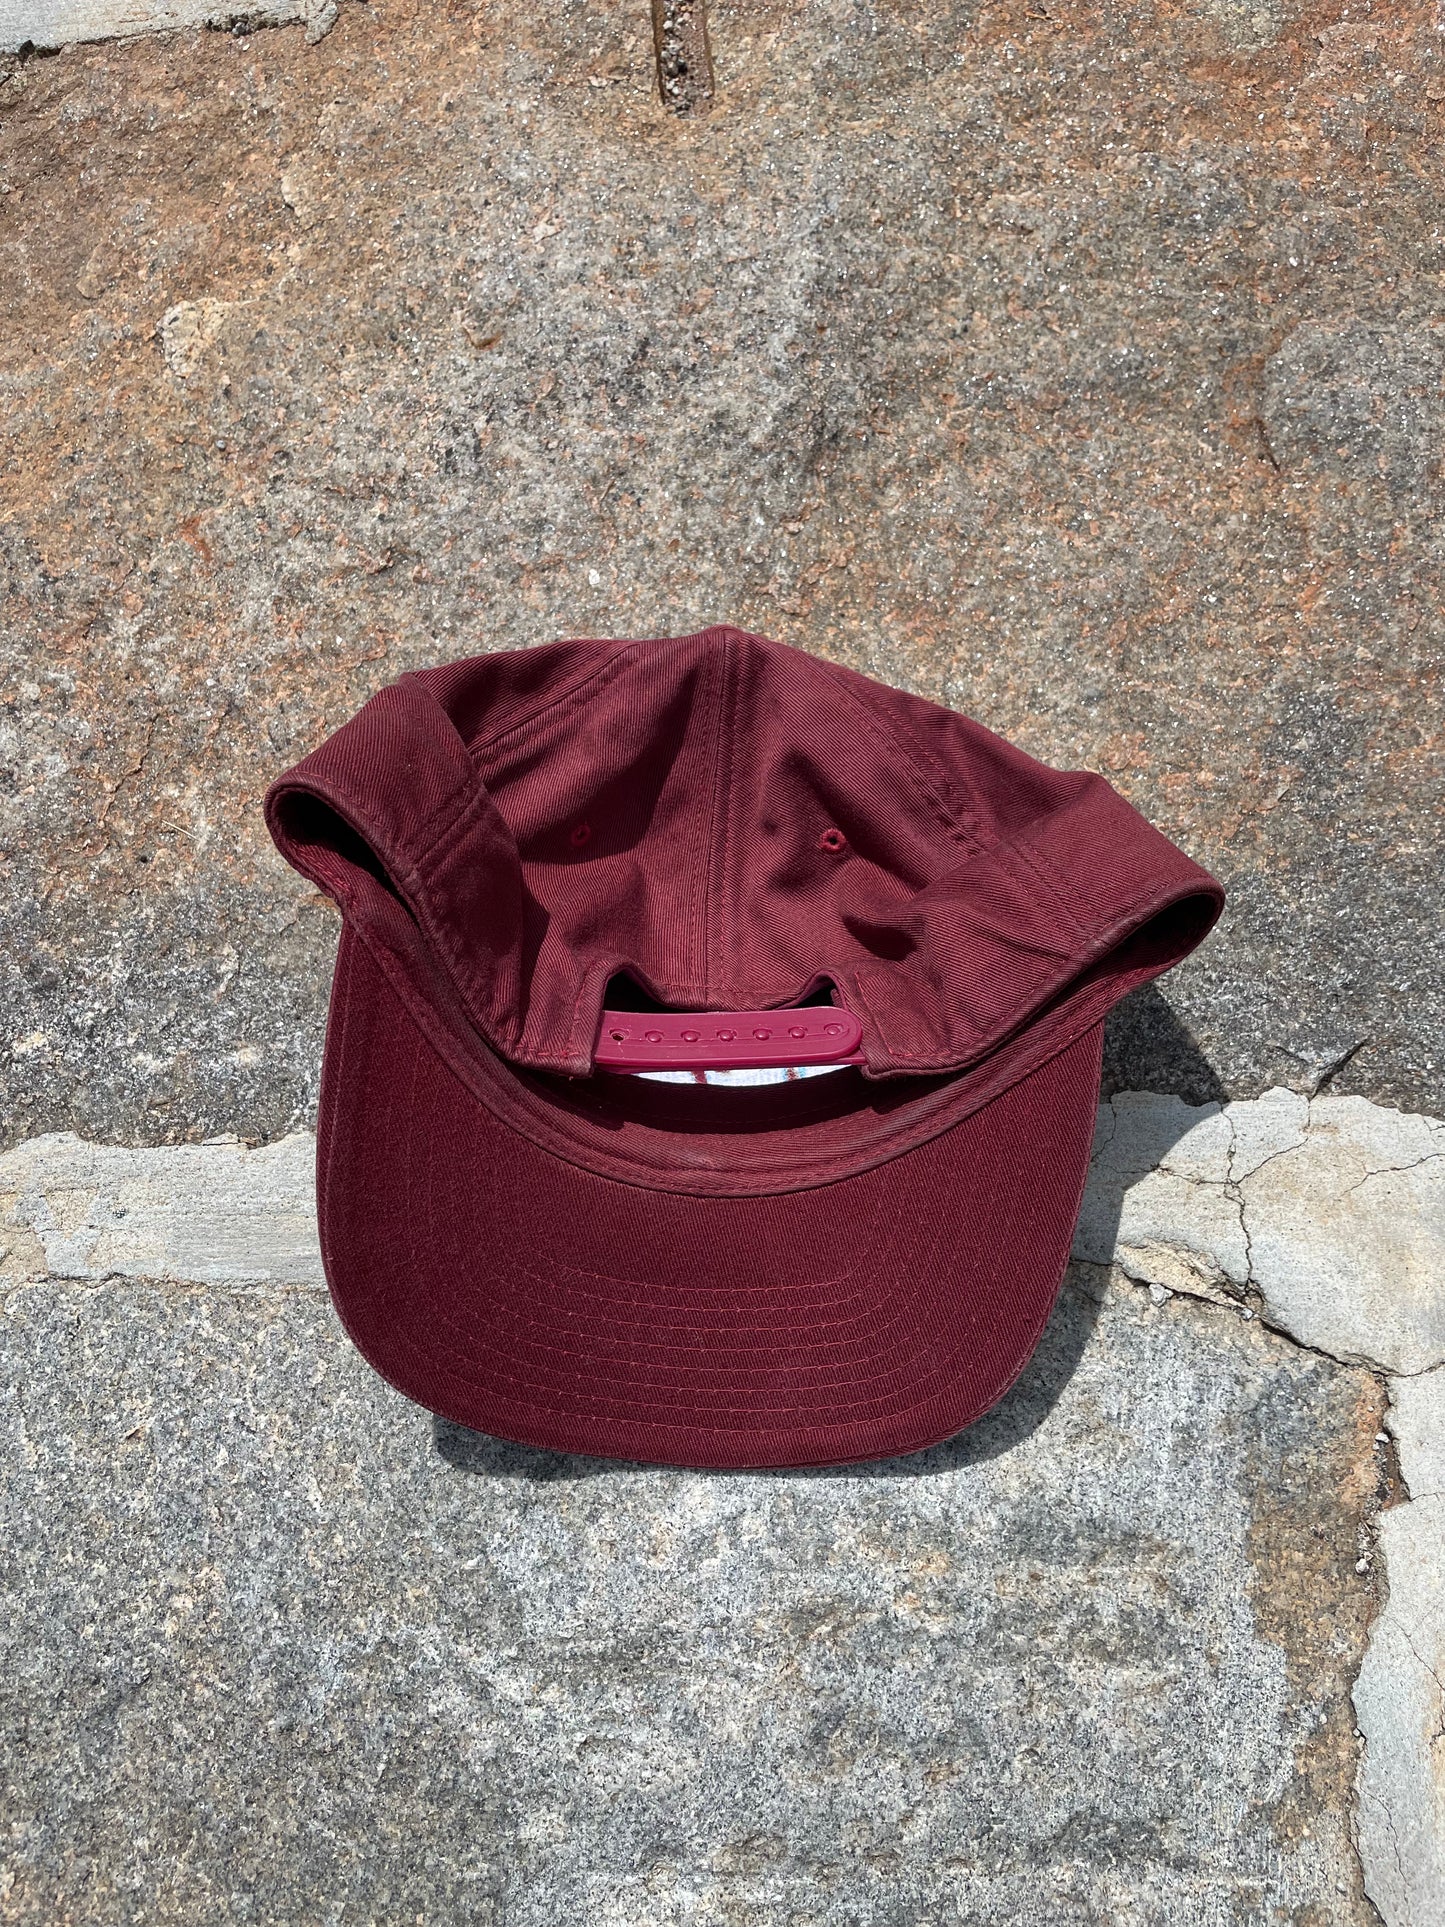 SS16 “The Greatest” - Undercover ‘SCAB’ Snapback